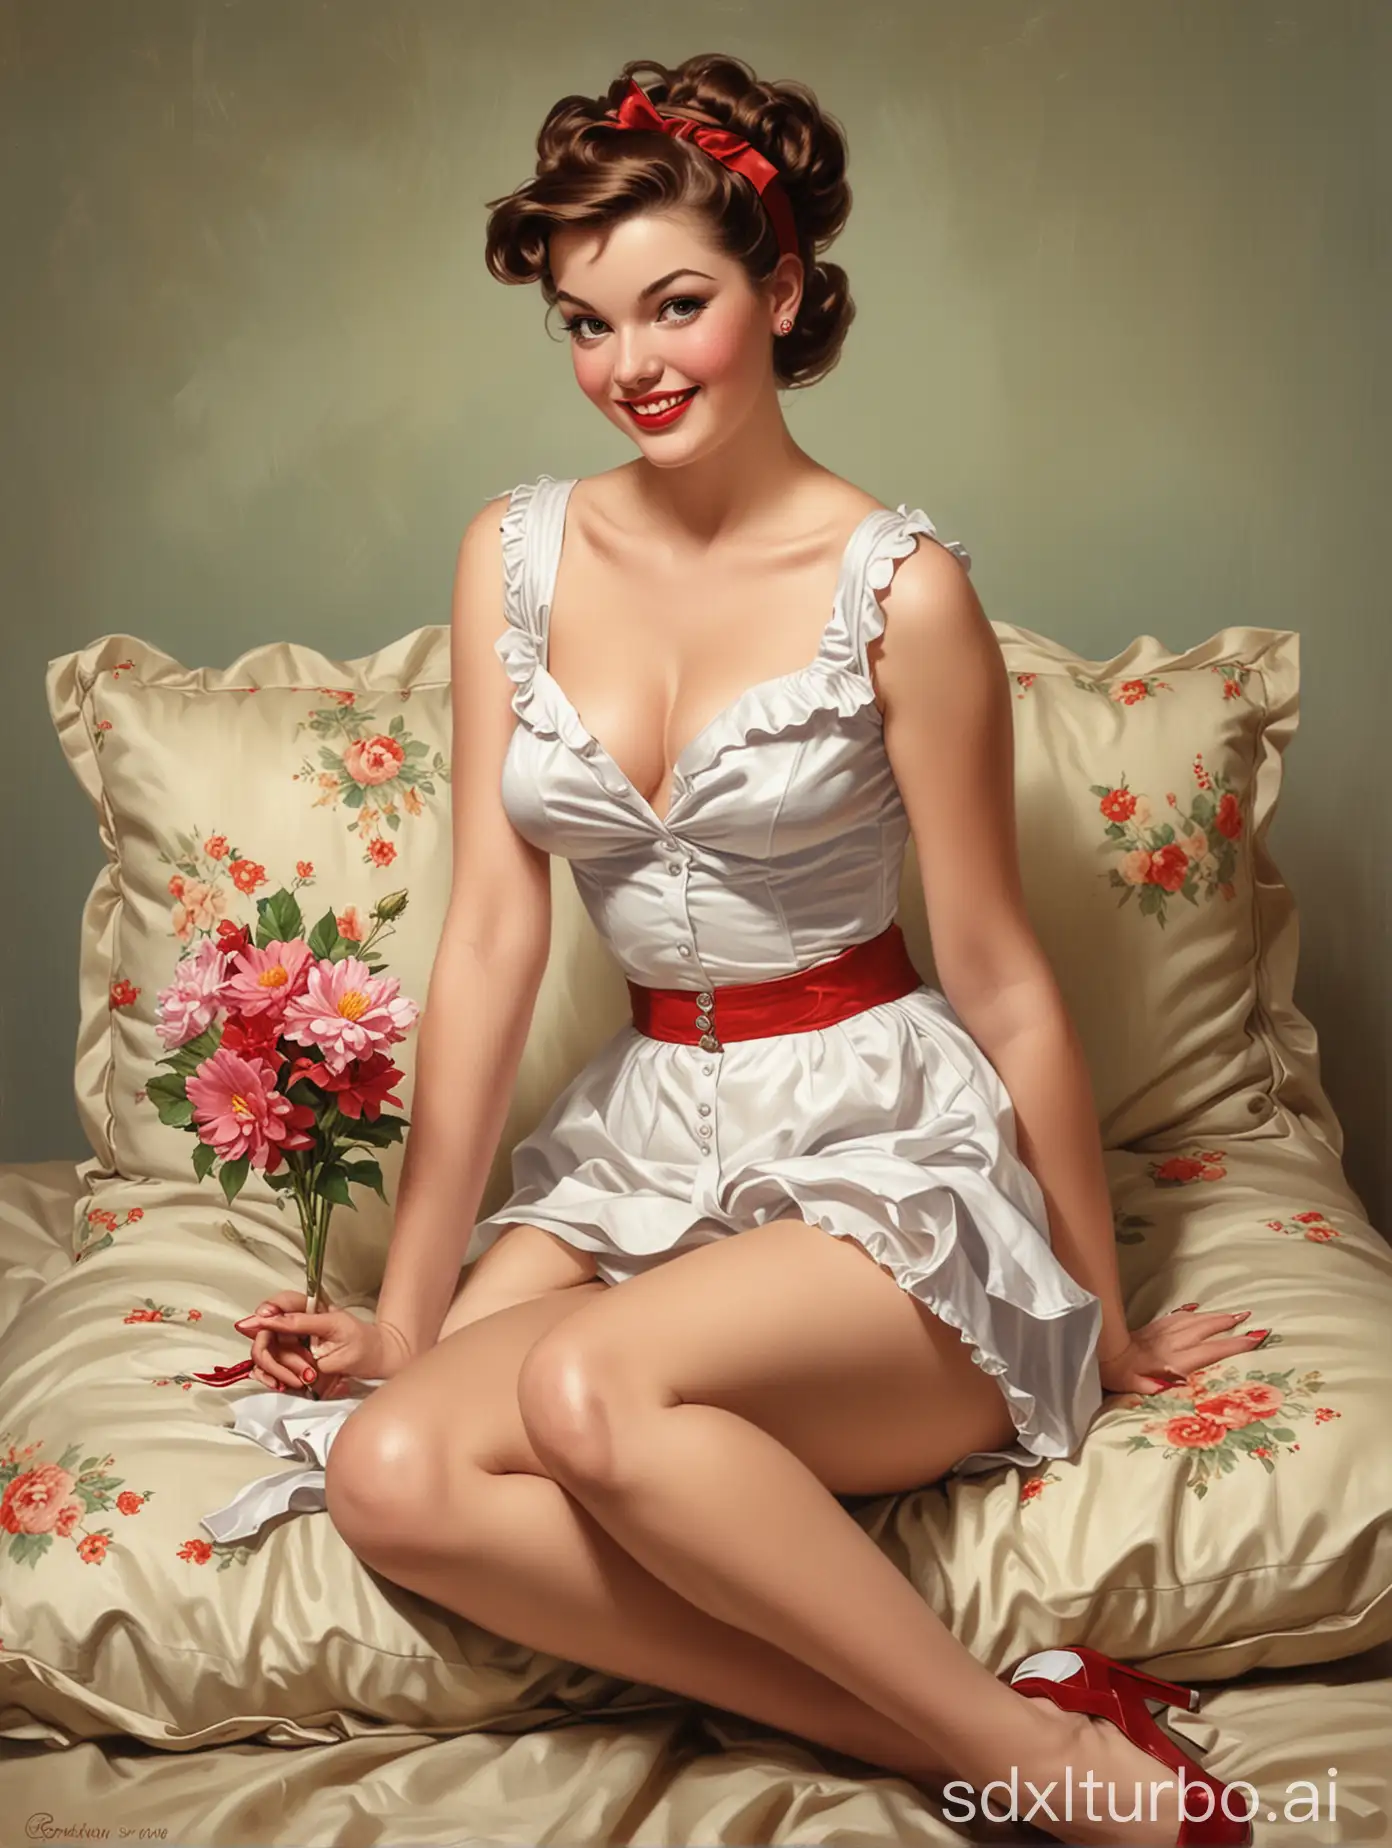 Pinup-Art-Smiling-Woman-Picking-Up-a-Flower-with-a-Mischievous-Grin